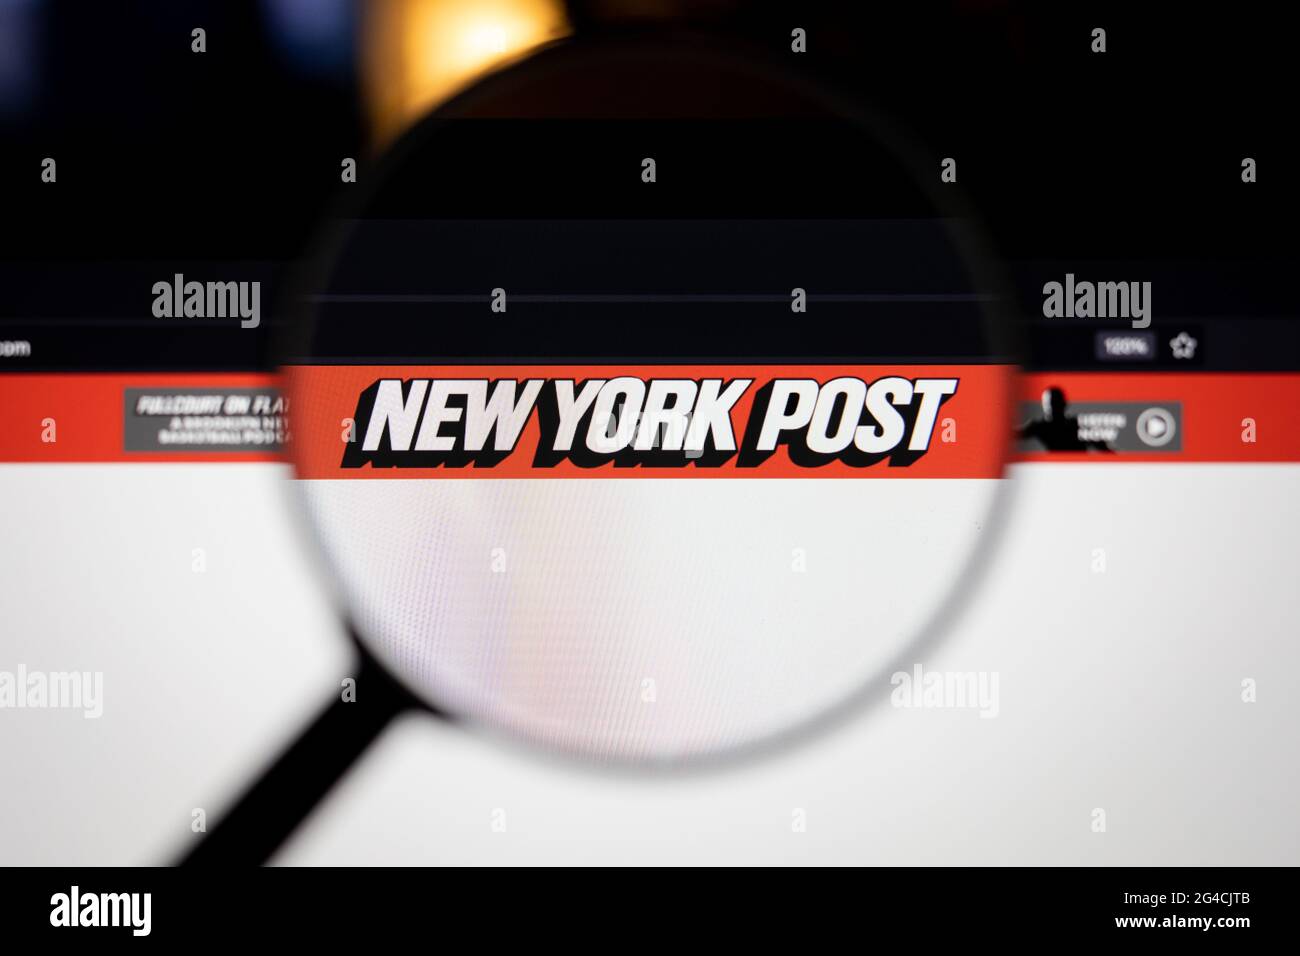 New York Post company logo on a website, seen on a computer screen through a magnifying glass.new york post, news, logo, company, website, business, h Stock Photo